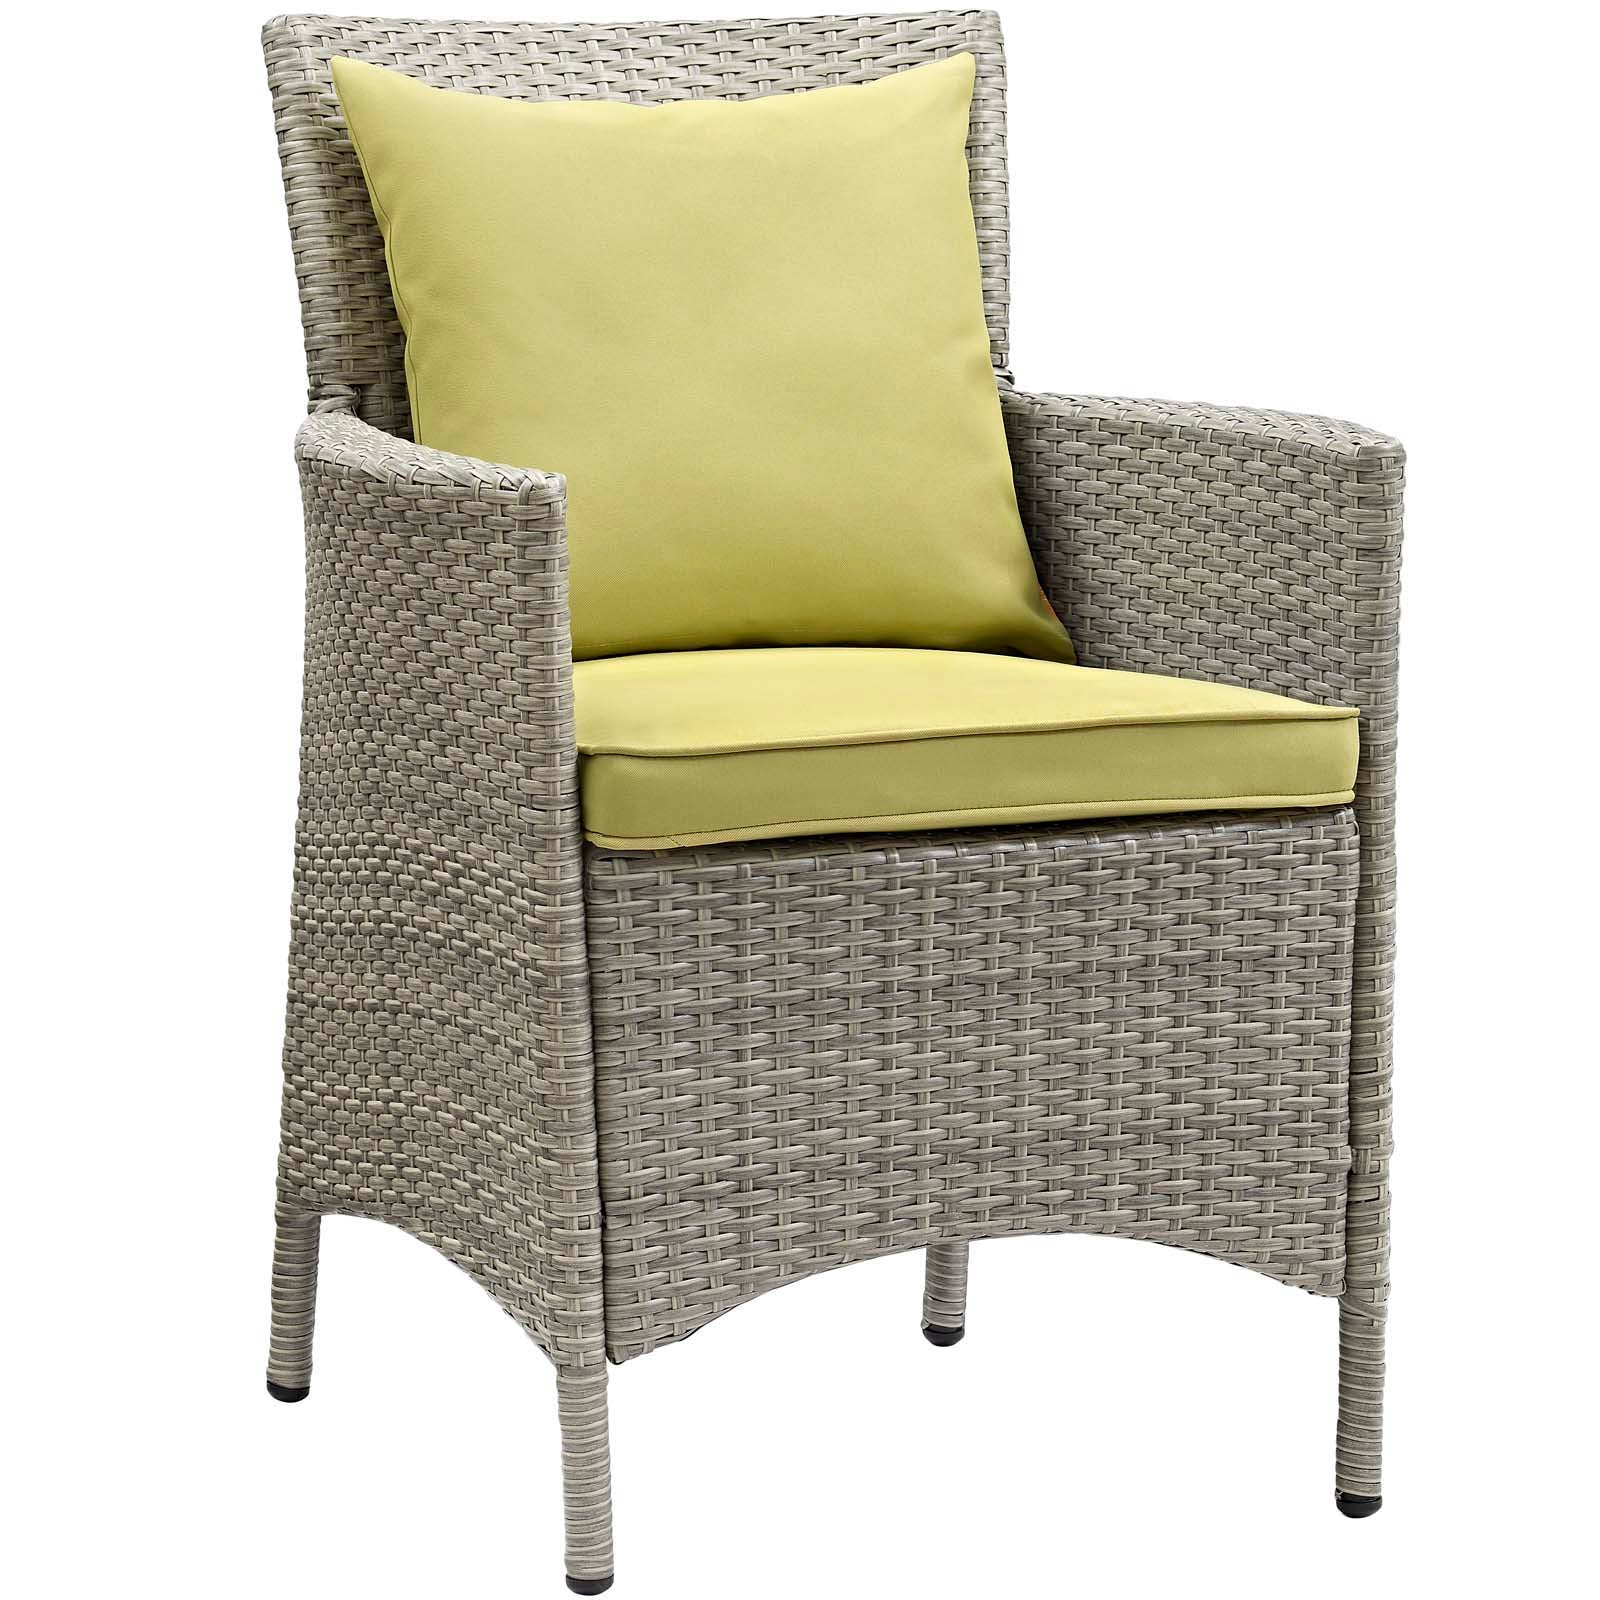 Modway Outdoor Dining Chairs - Conduit Outdoor Patio Wicker Rattan Dining Armchair Set of 4 Light Gray Peridot